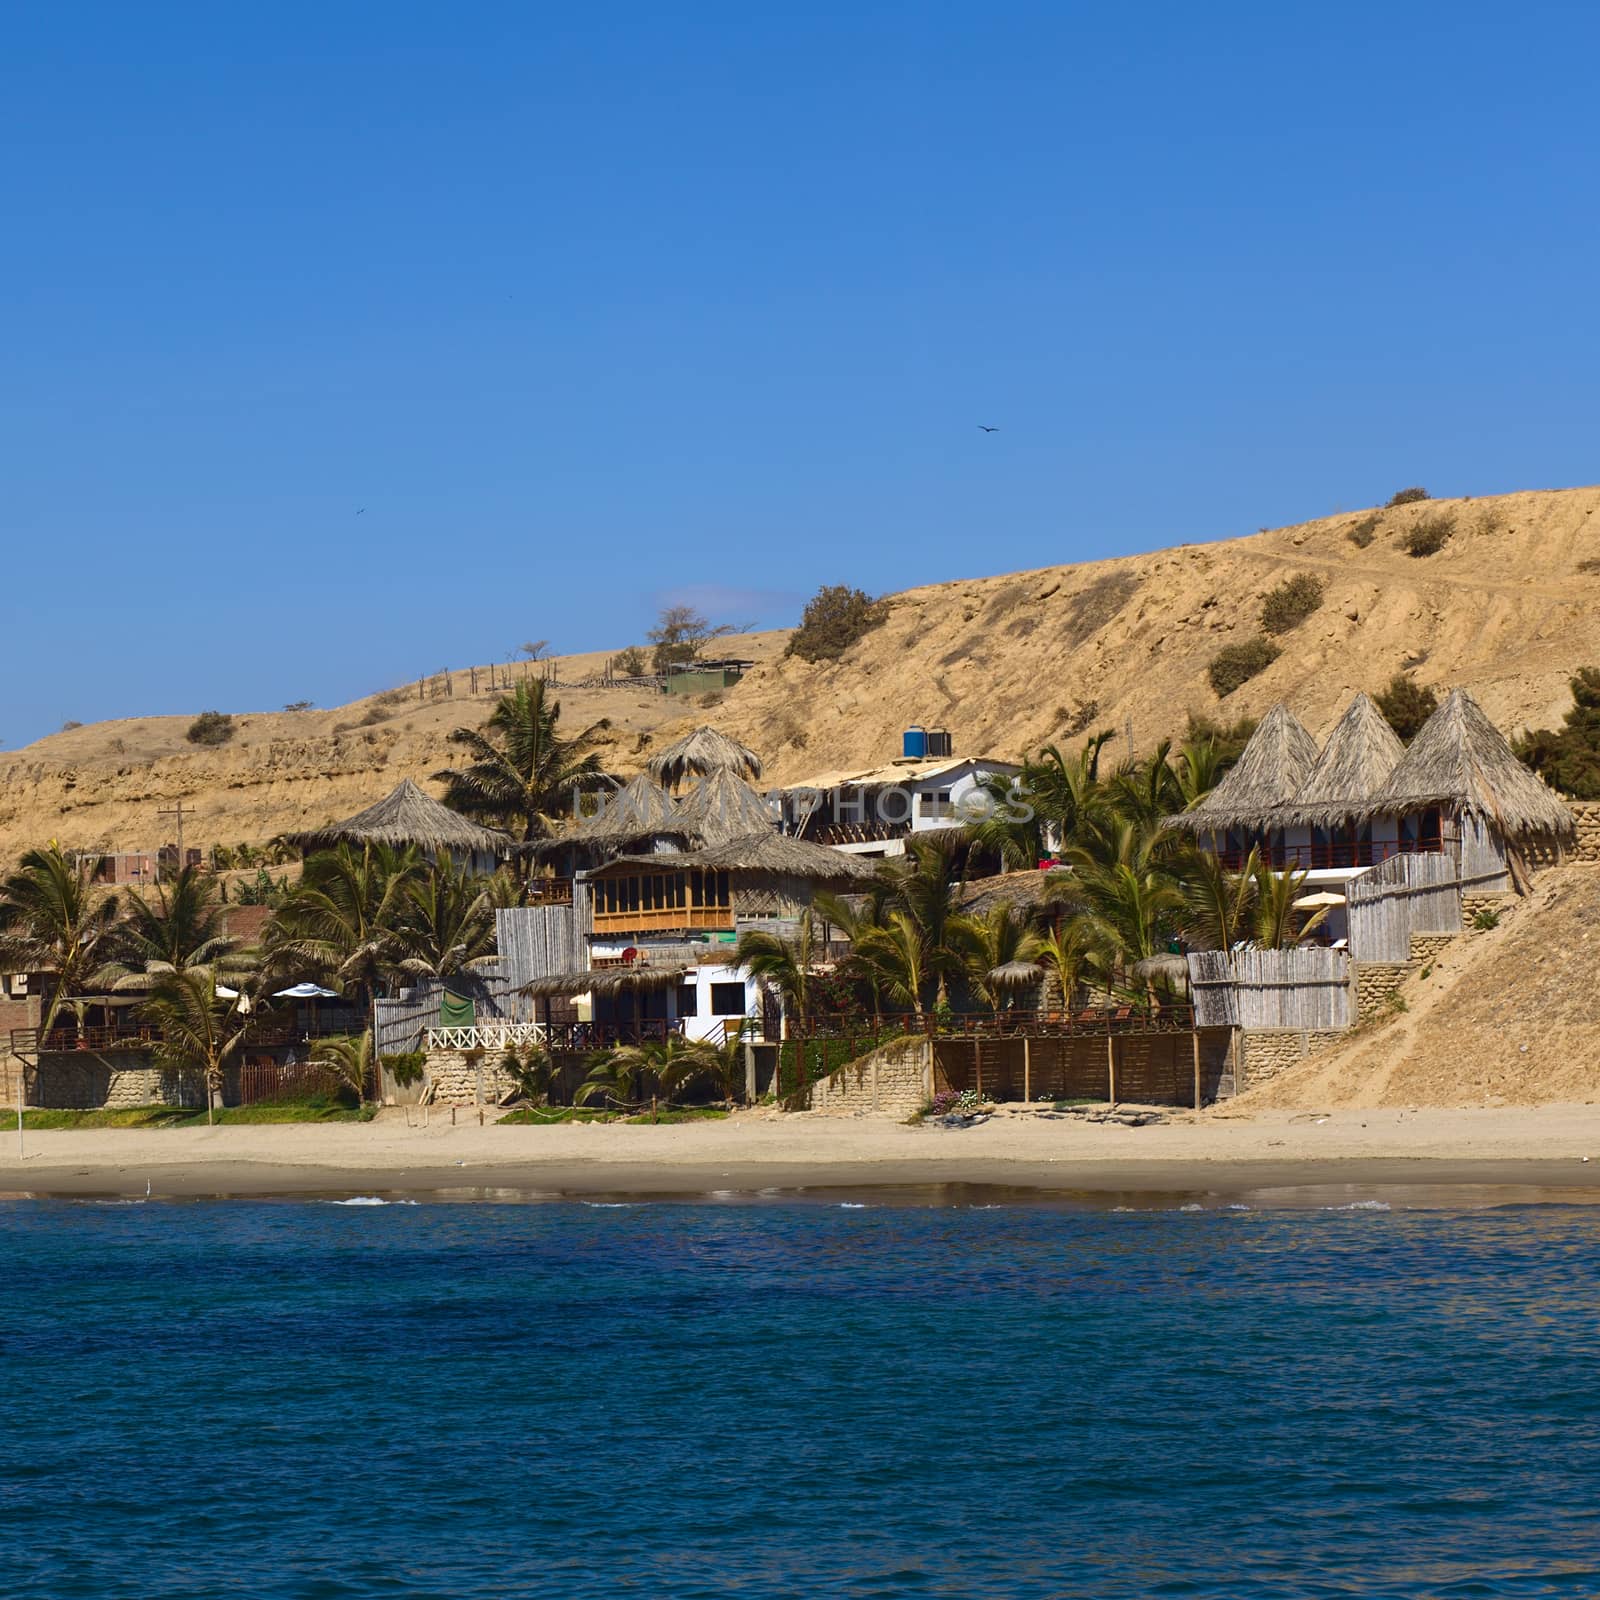 Thatched roof buildings and palm trees along the beach of the popular small beach town of Mancora in Northern Peru